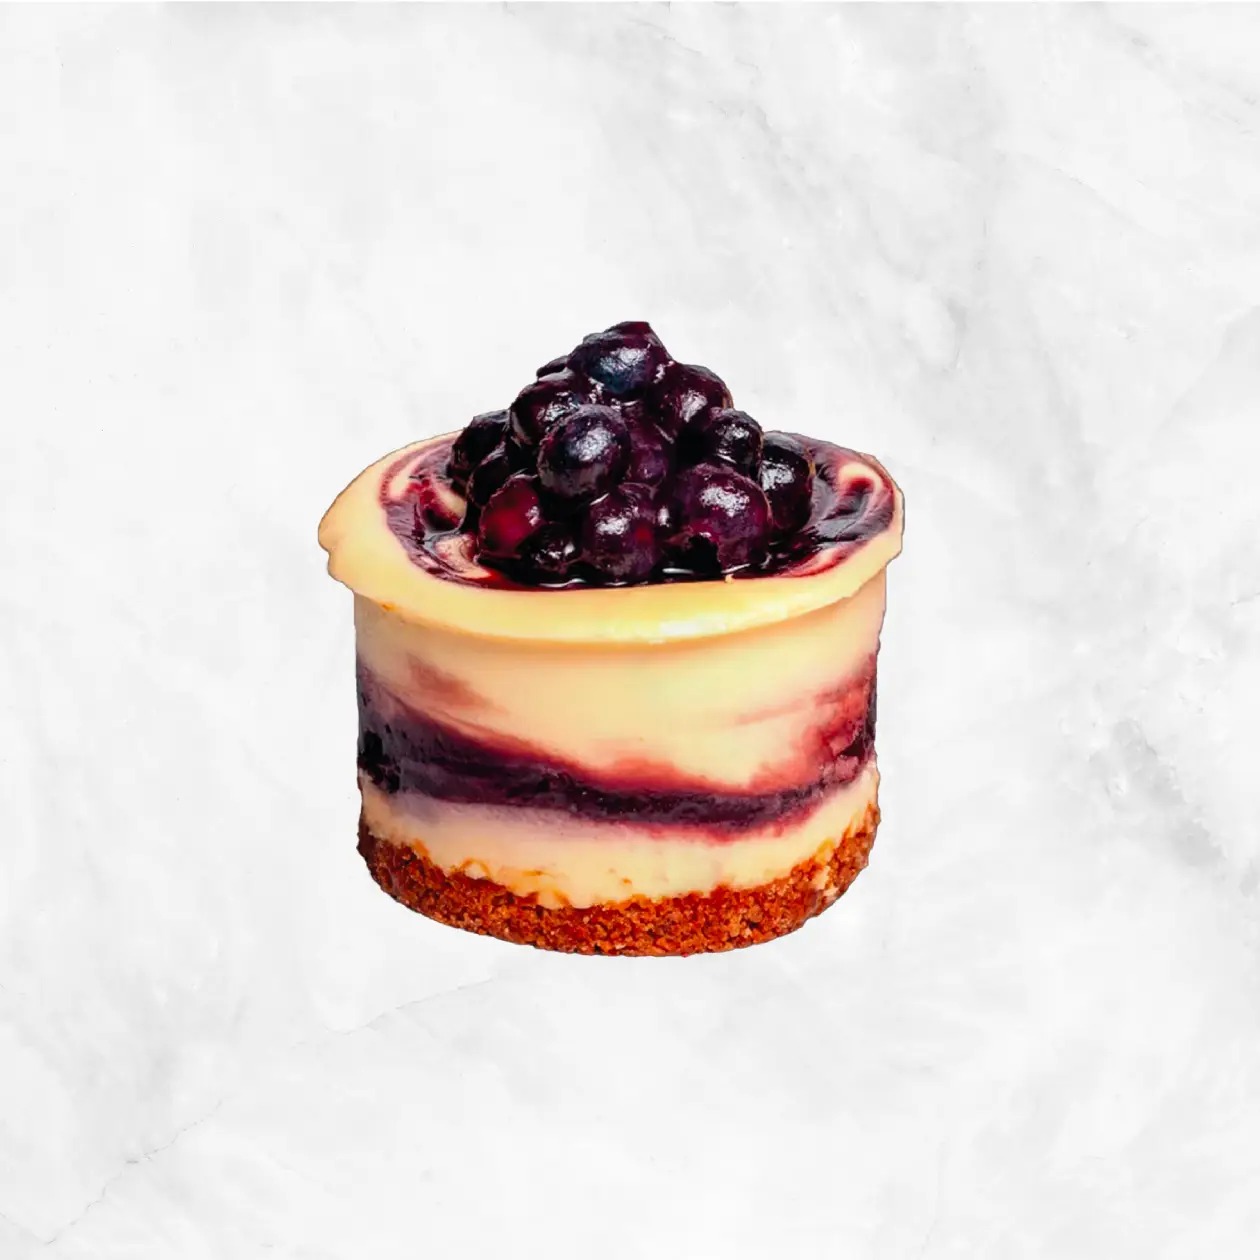 Mini Beet & Berry Cheesecake Delivery